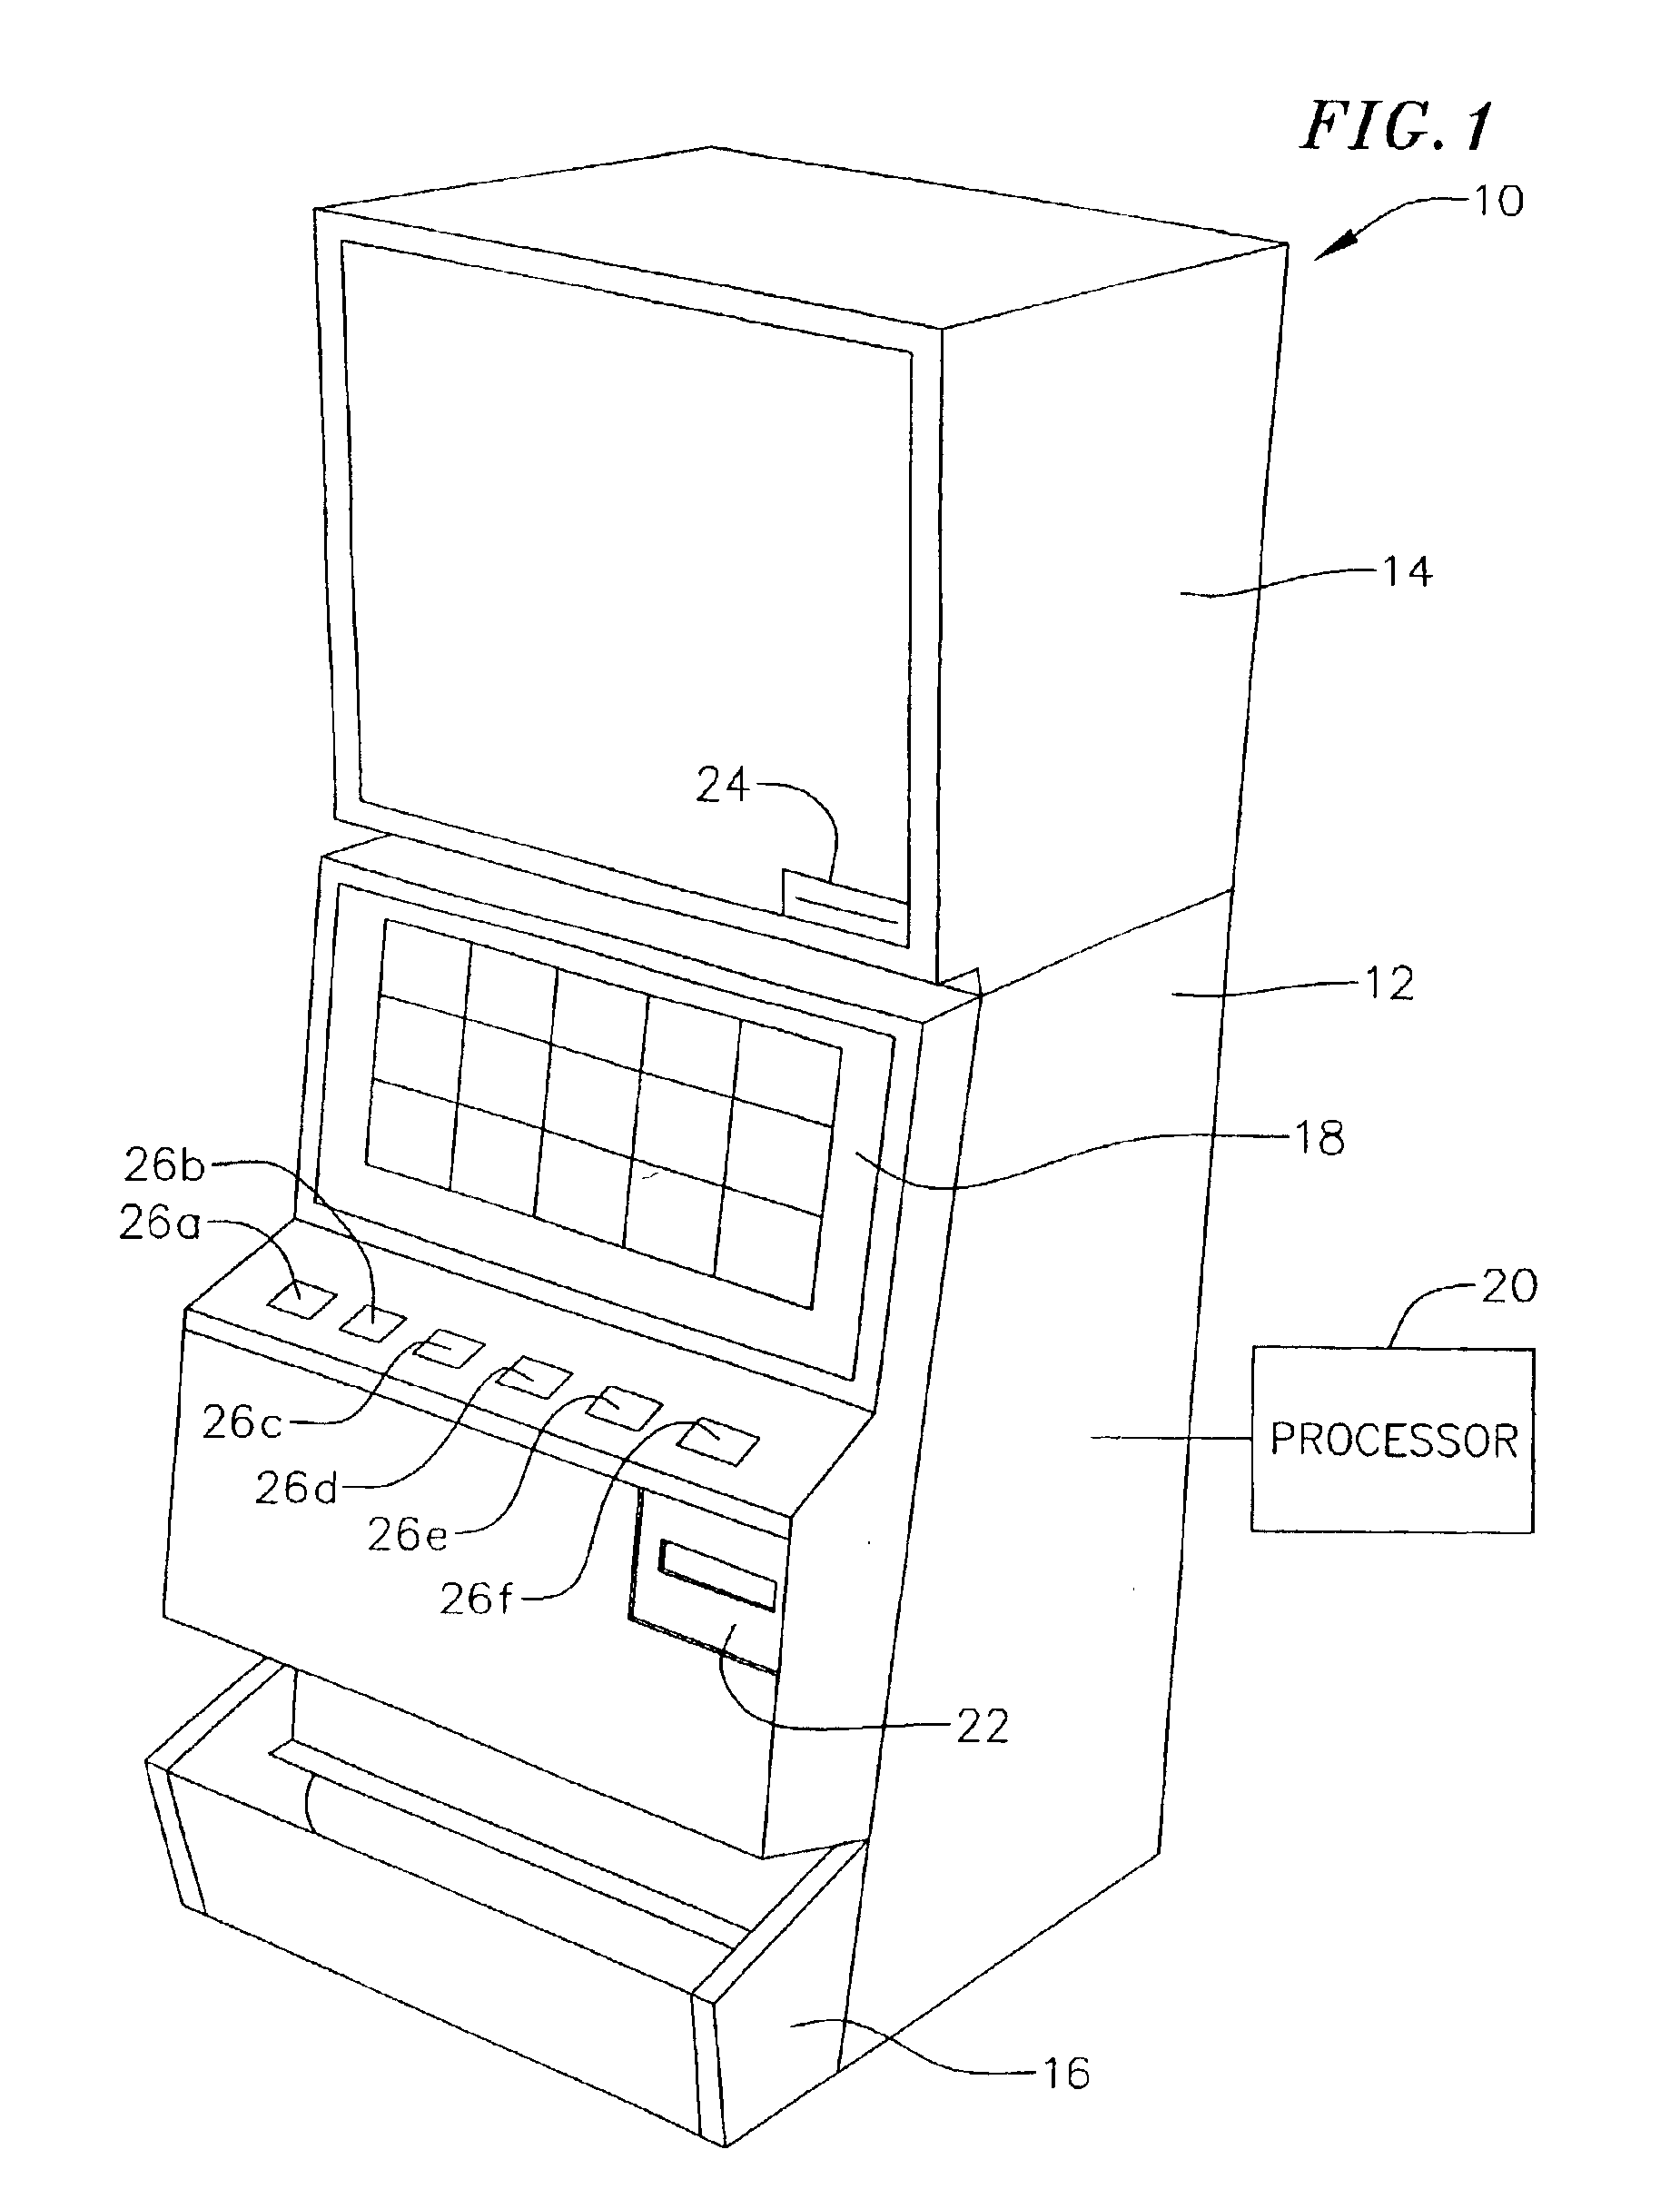 Electronic game and method for playing a game based upon removal and replacing symbols in the game matrix